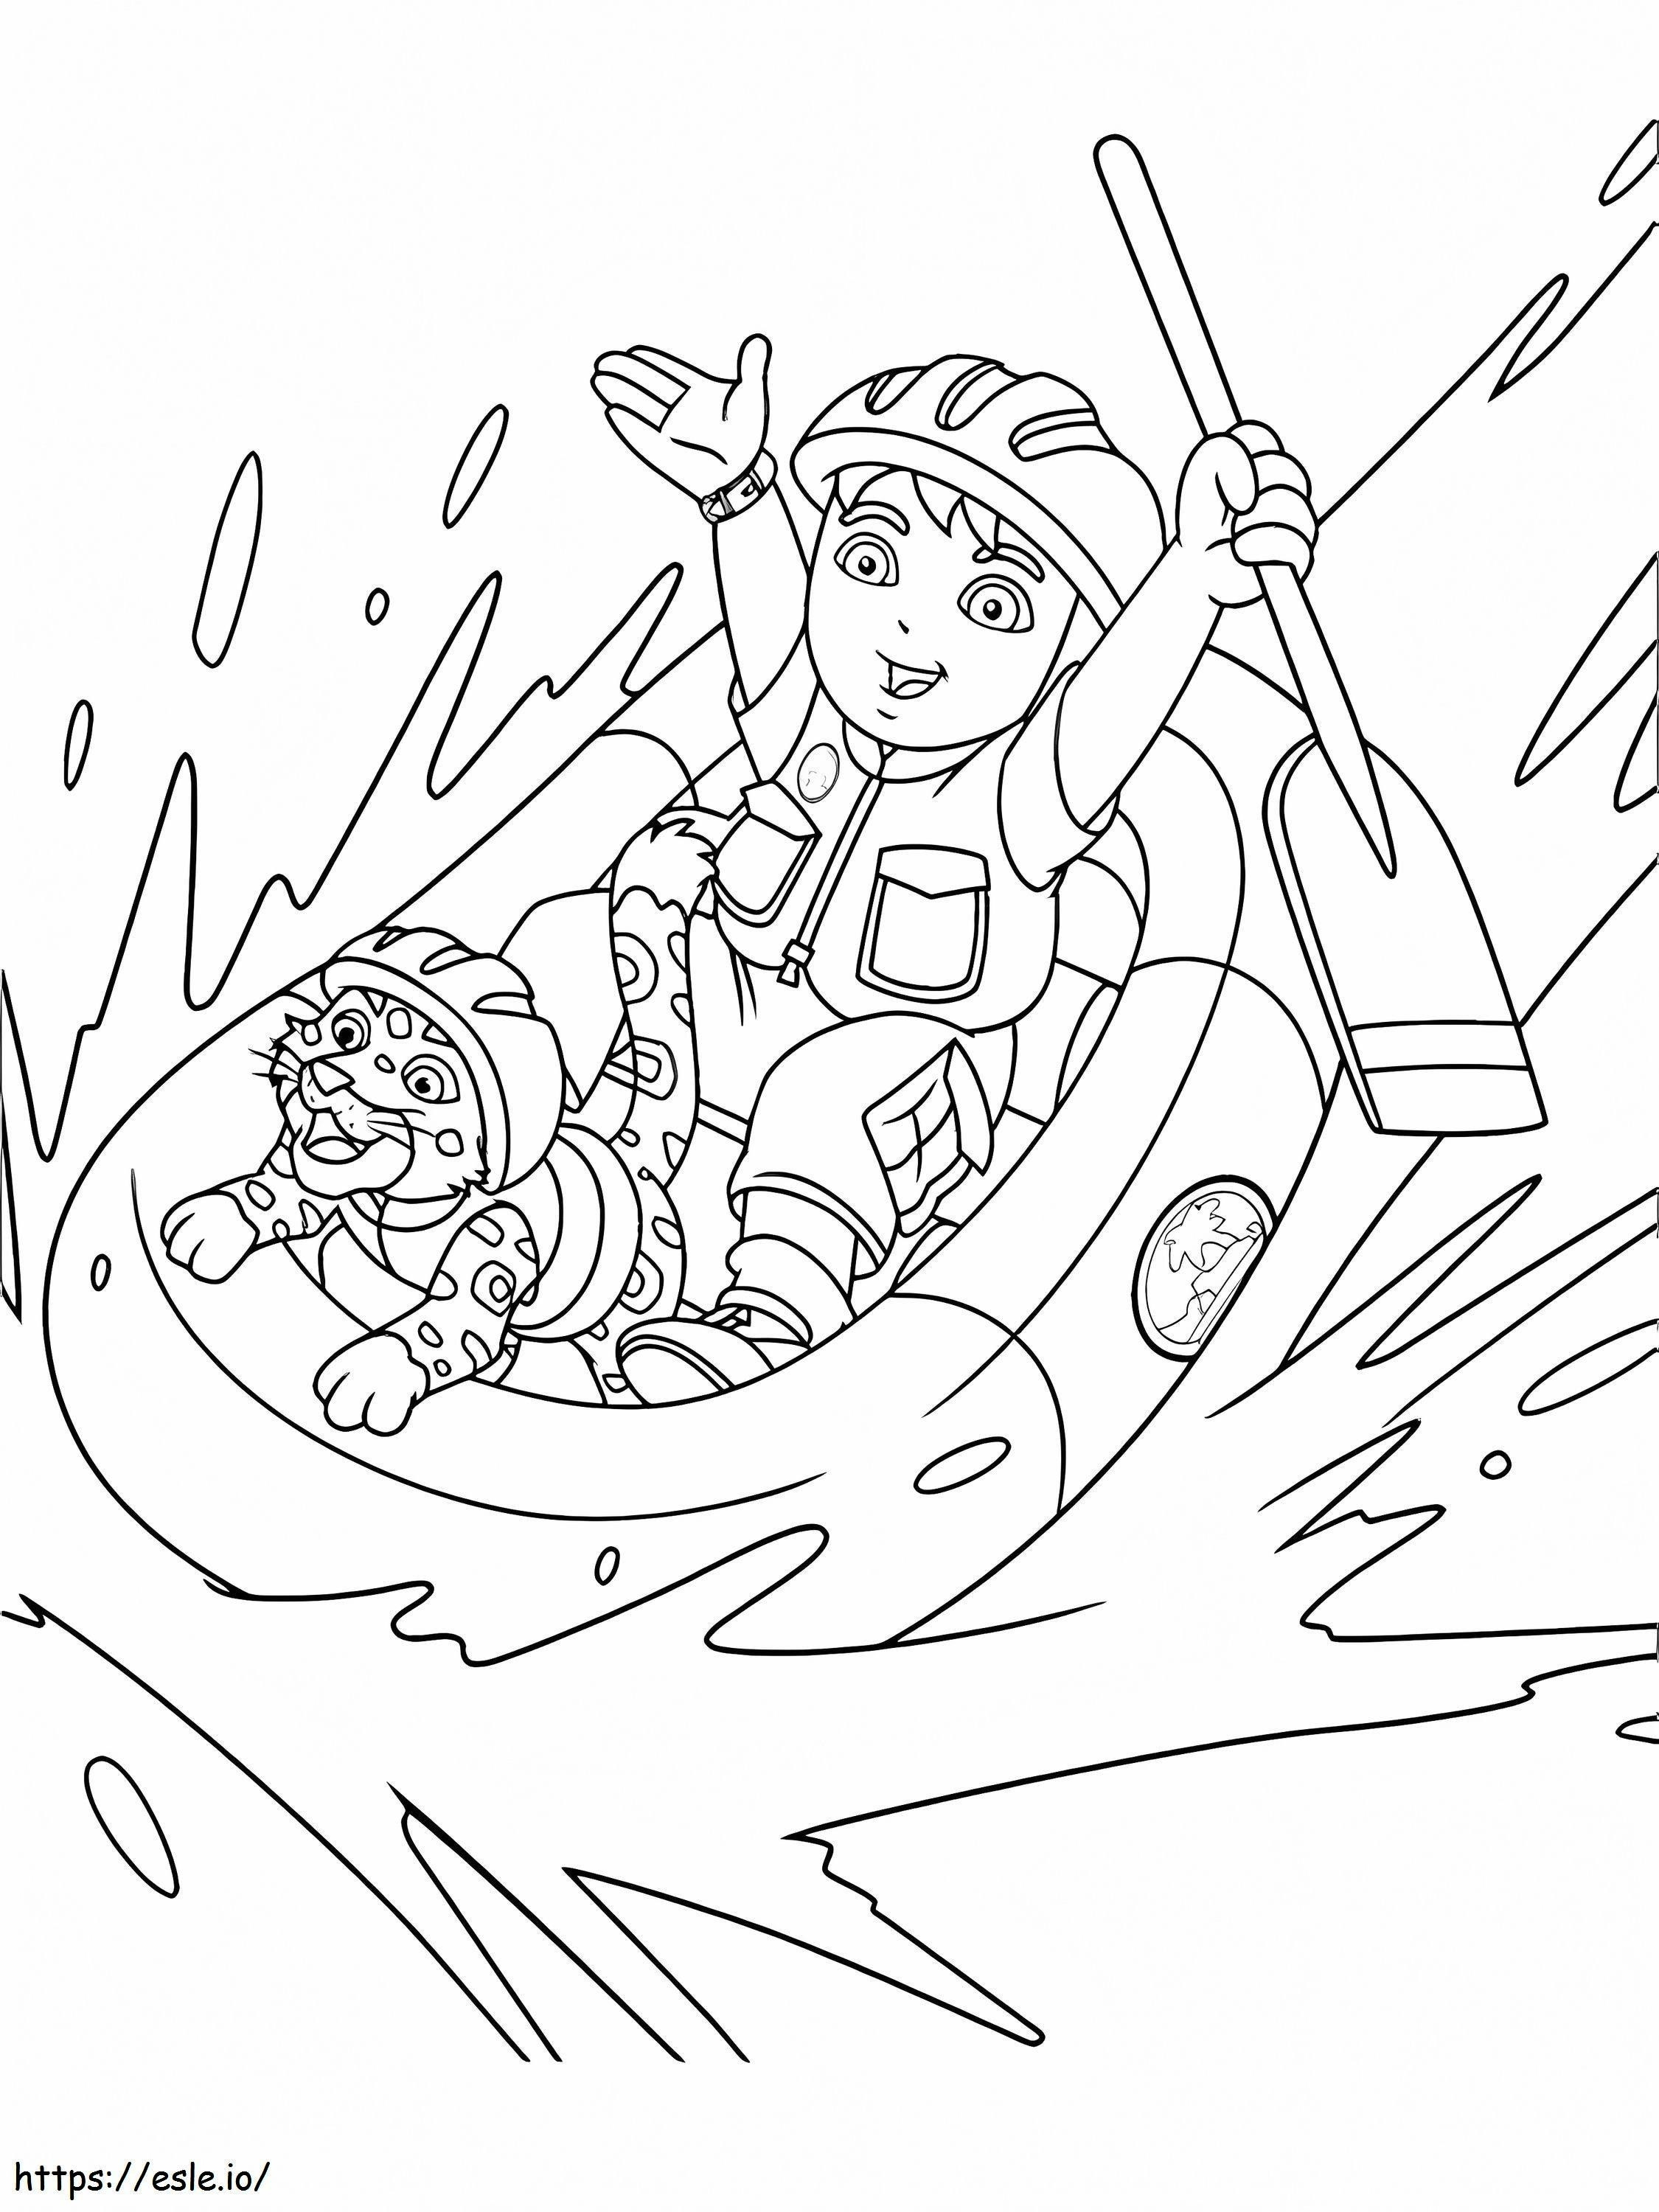 Diego And Baby Jaguar Rowing coloring page